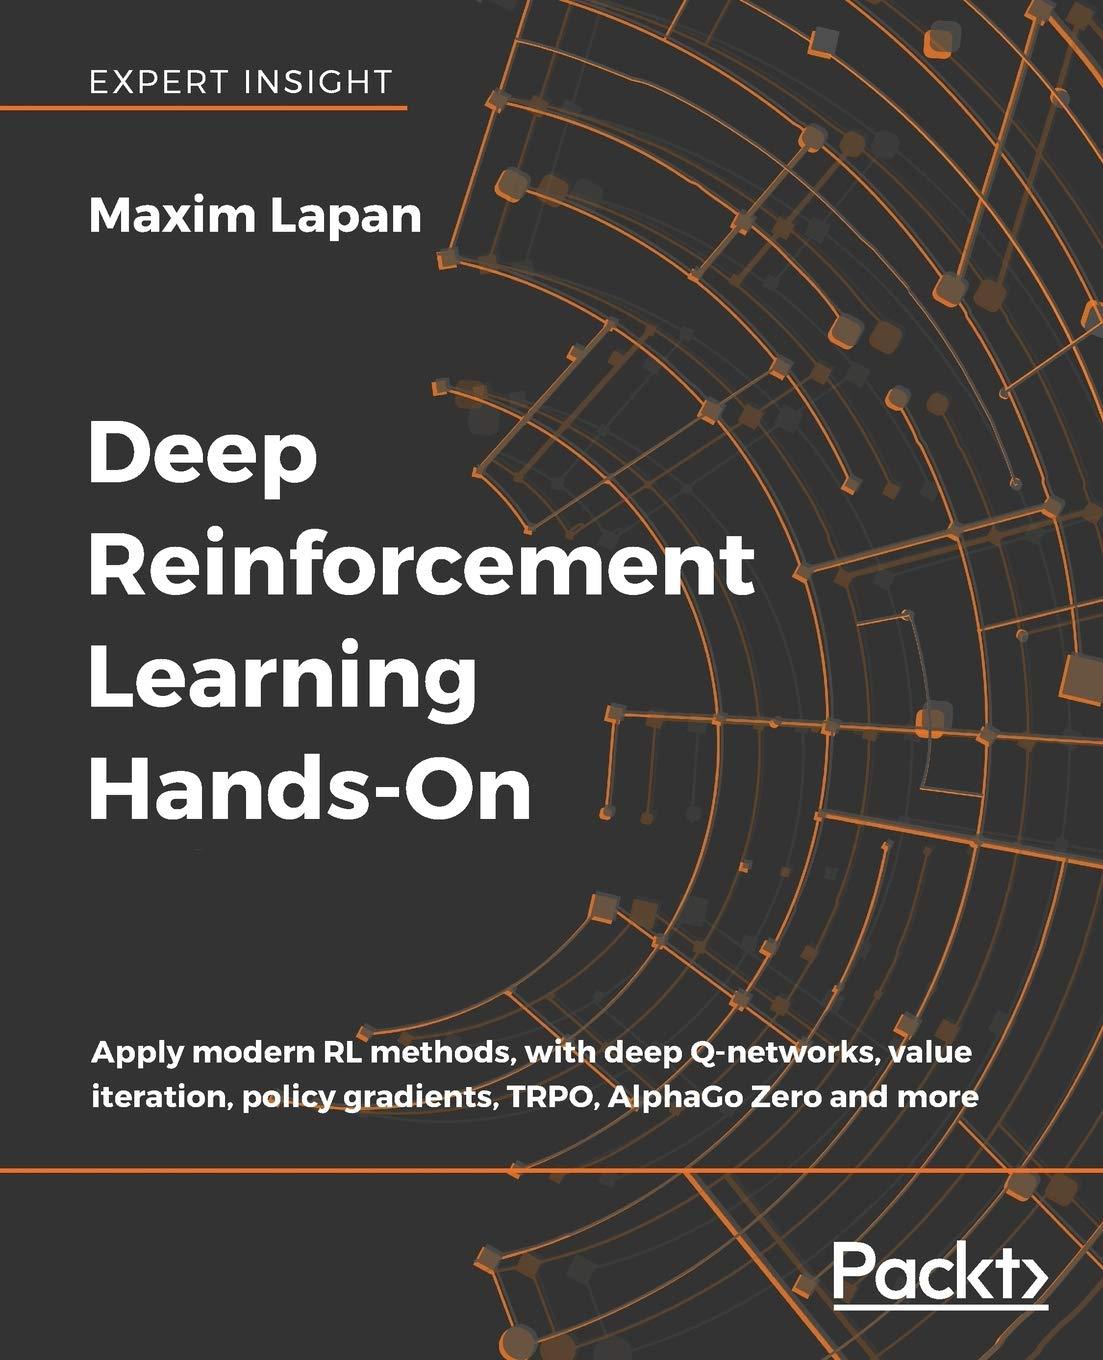 deep reinforcement learning hands on apply modern rl methods with deep q networks value iteration policy